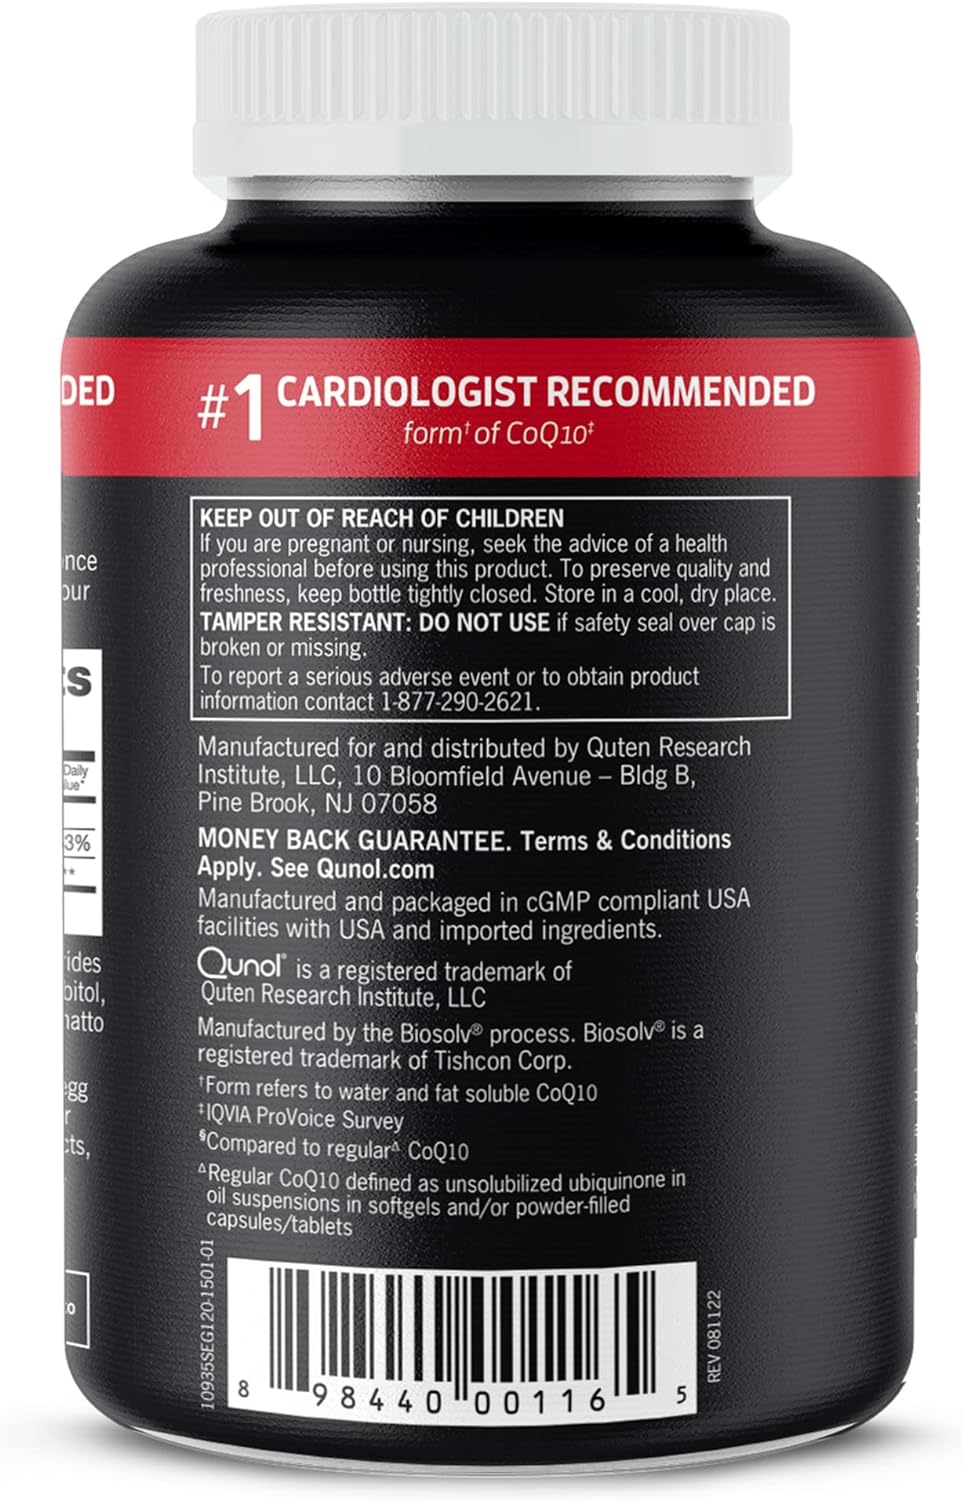 Qunol CoQ10 100mg Softgels: Enhanced Absorption, Heart Health & Energy Support, Antioxidant Coenzyme Q10 Supplement - 120 Count, 4 Month Supply